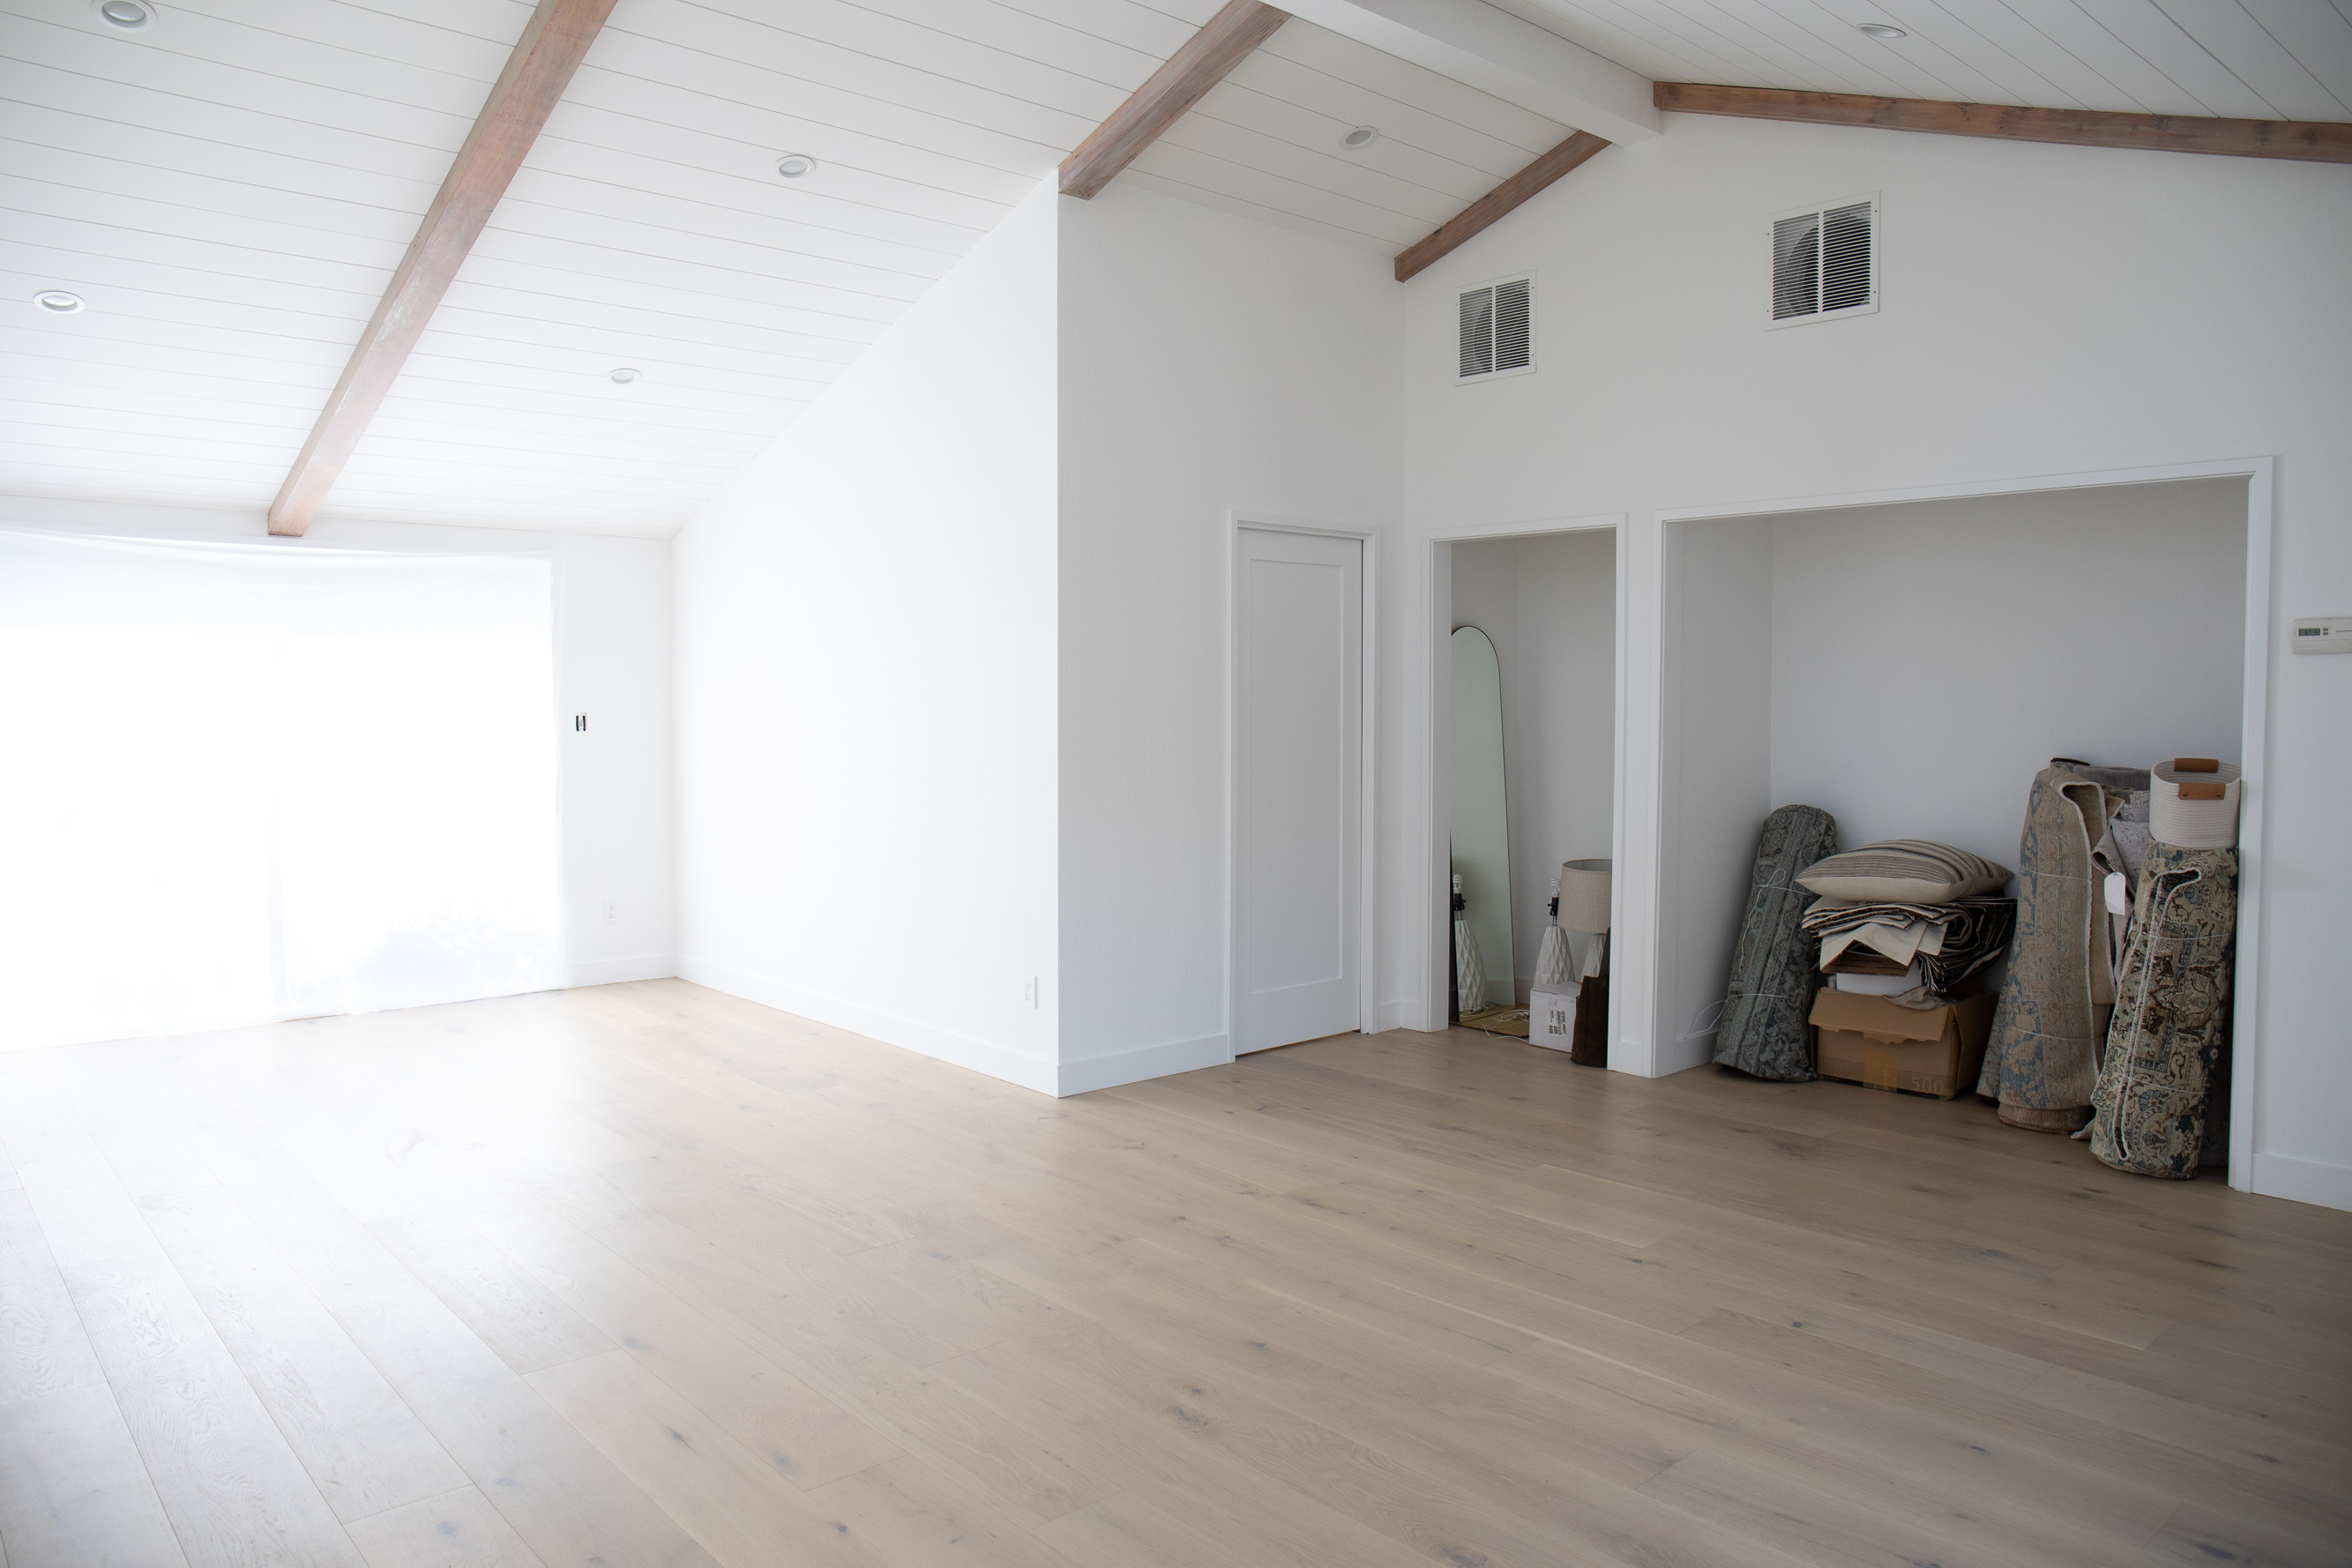 Vaulted ceiling, white shiplap ceiling paneling, master suite renovation